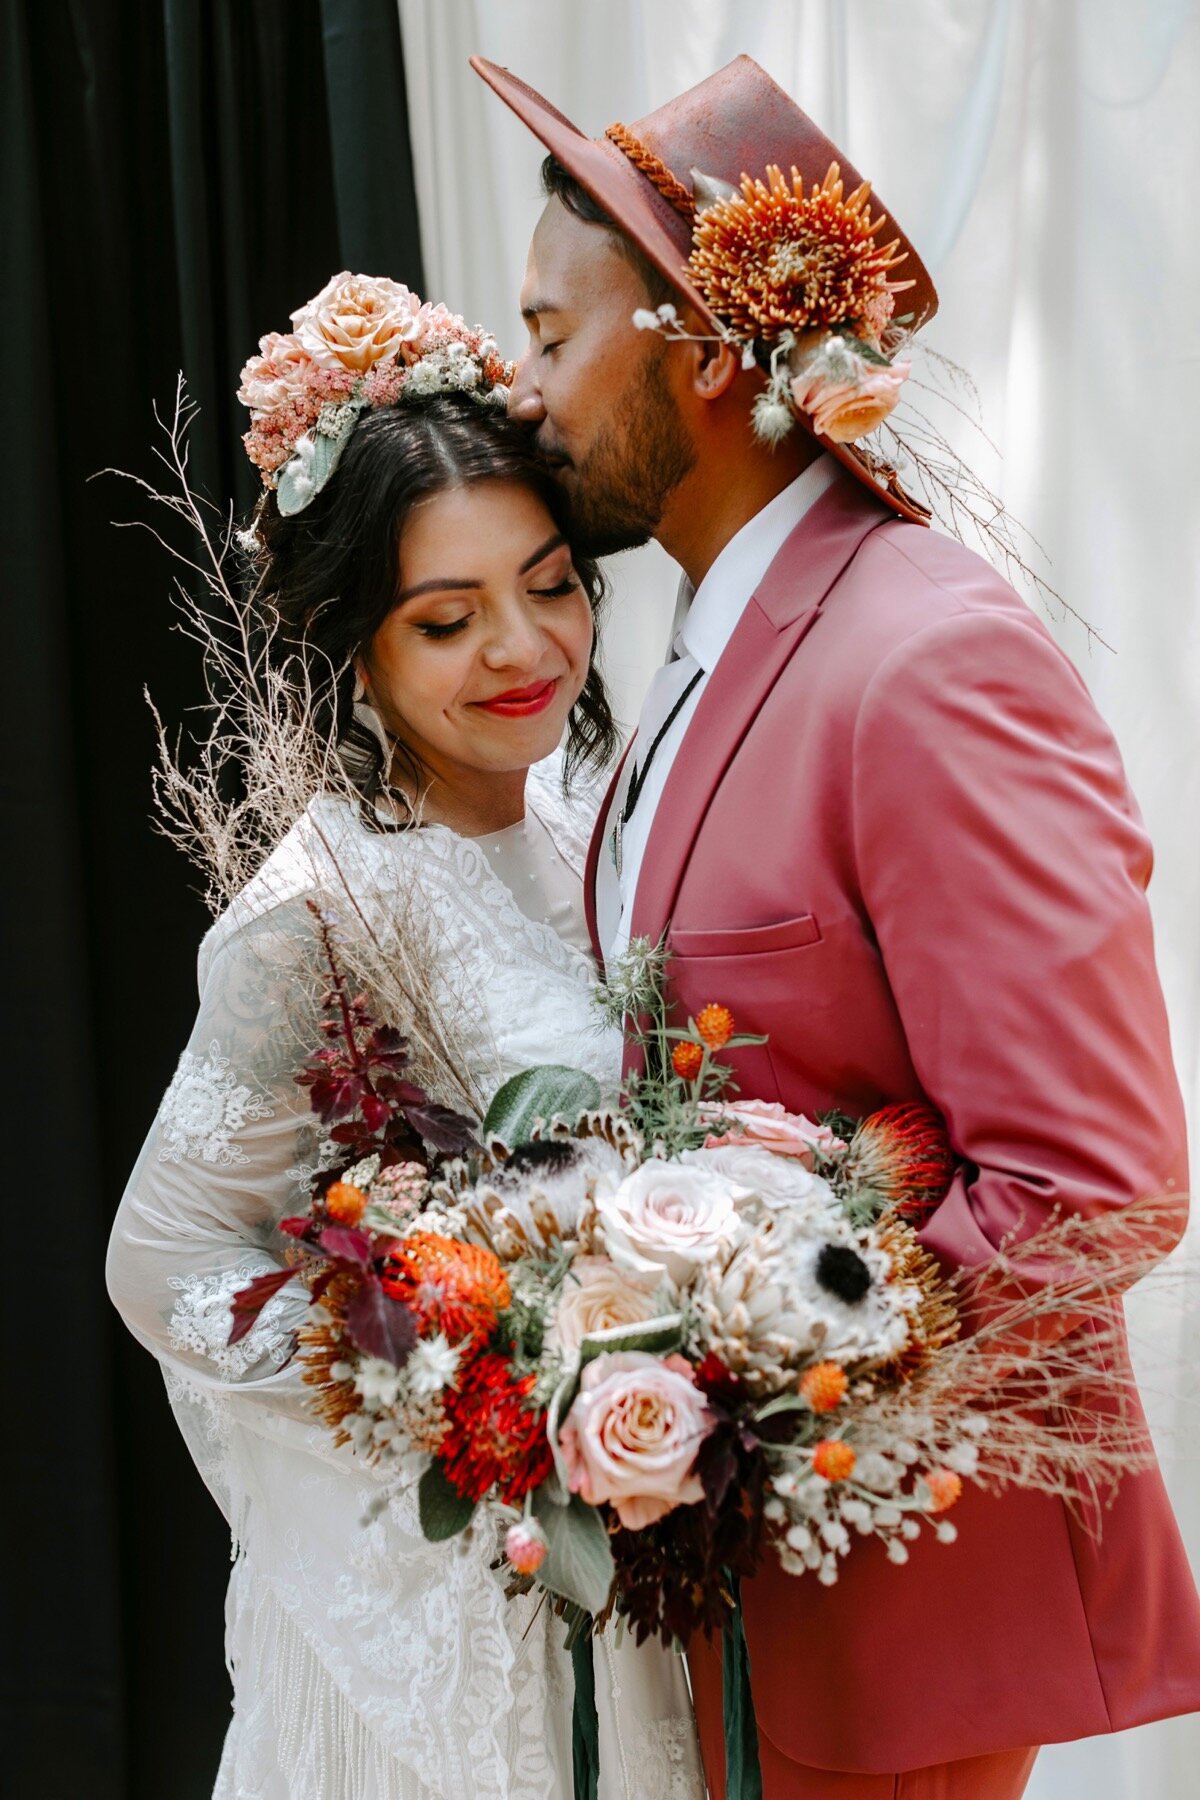 05_how-we-gather-097_tassels_colorful_suit_bradford_shoot_Chips_inspired_salsa_color_hat_Styled_hispanic_flowers_gatheringco_summer_cmp_groom.jpg